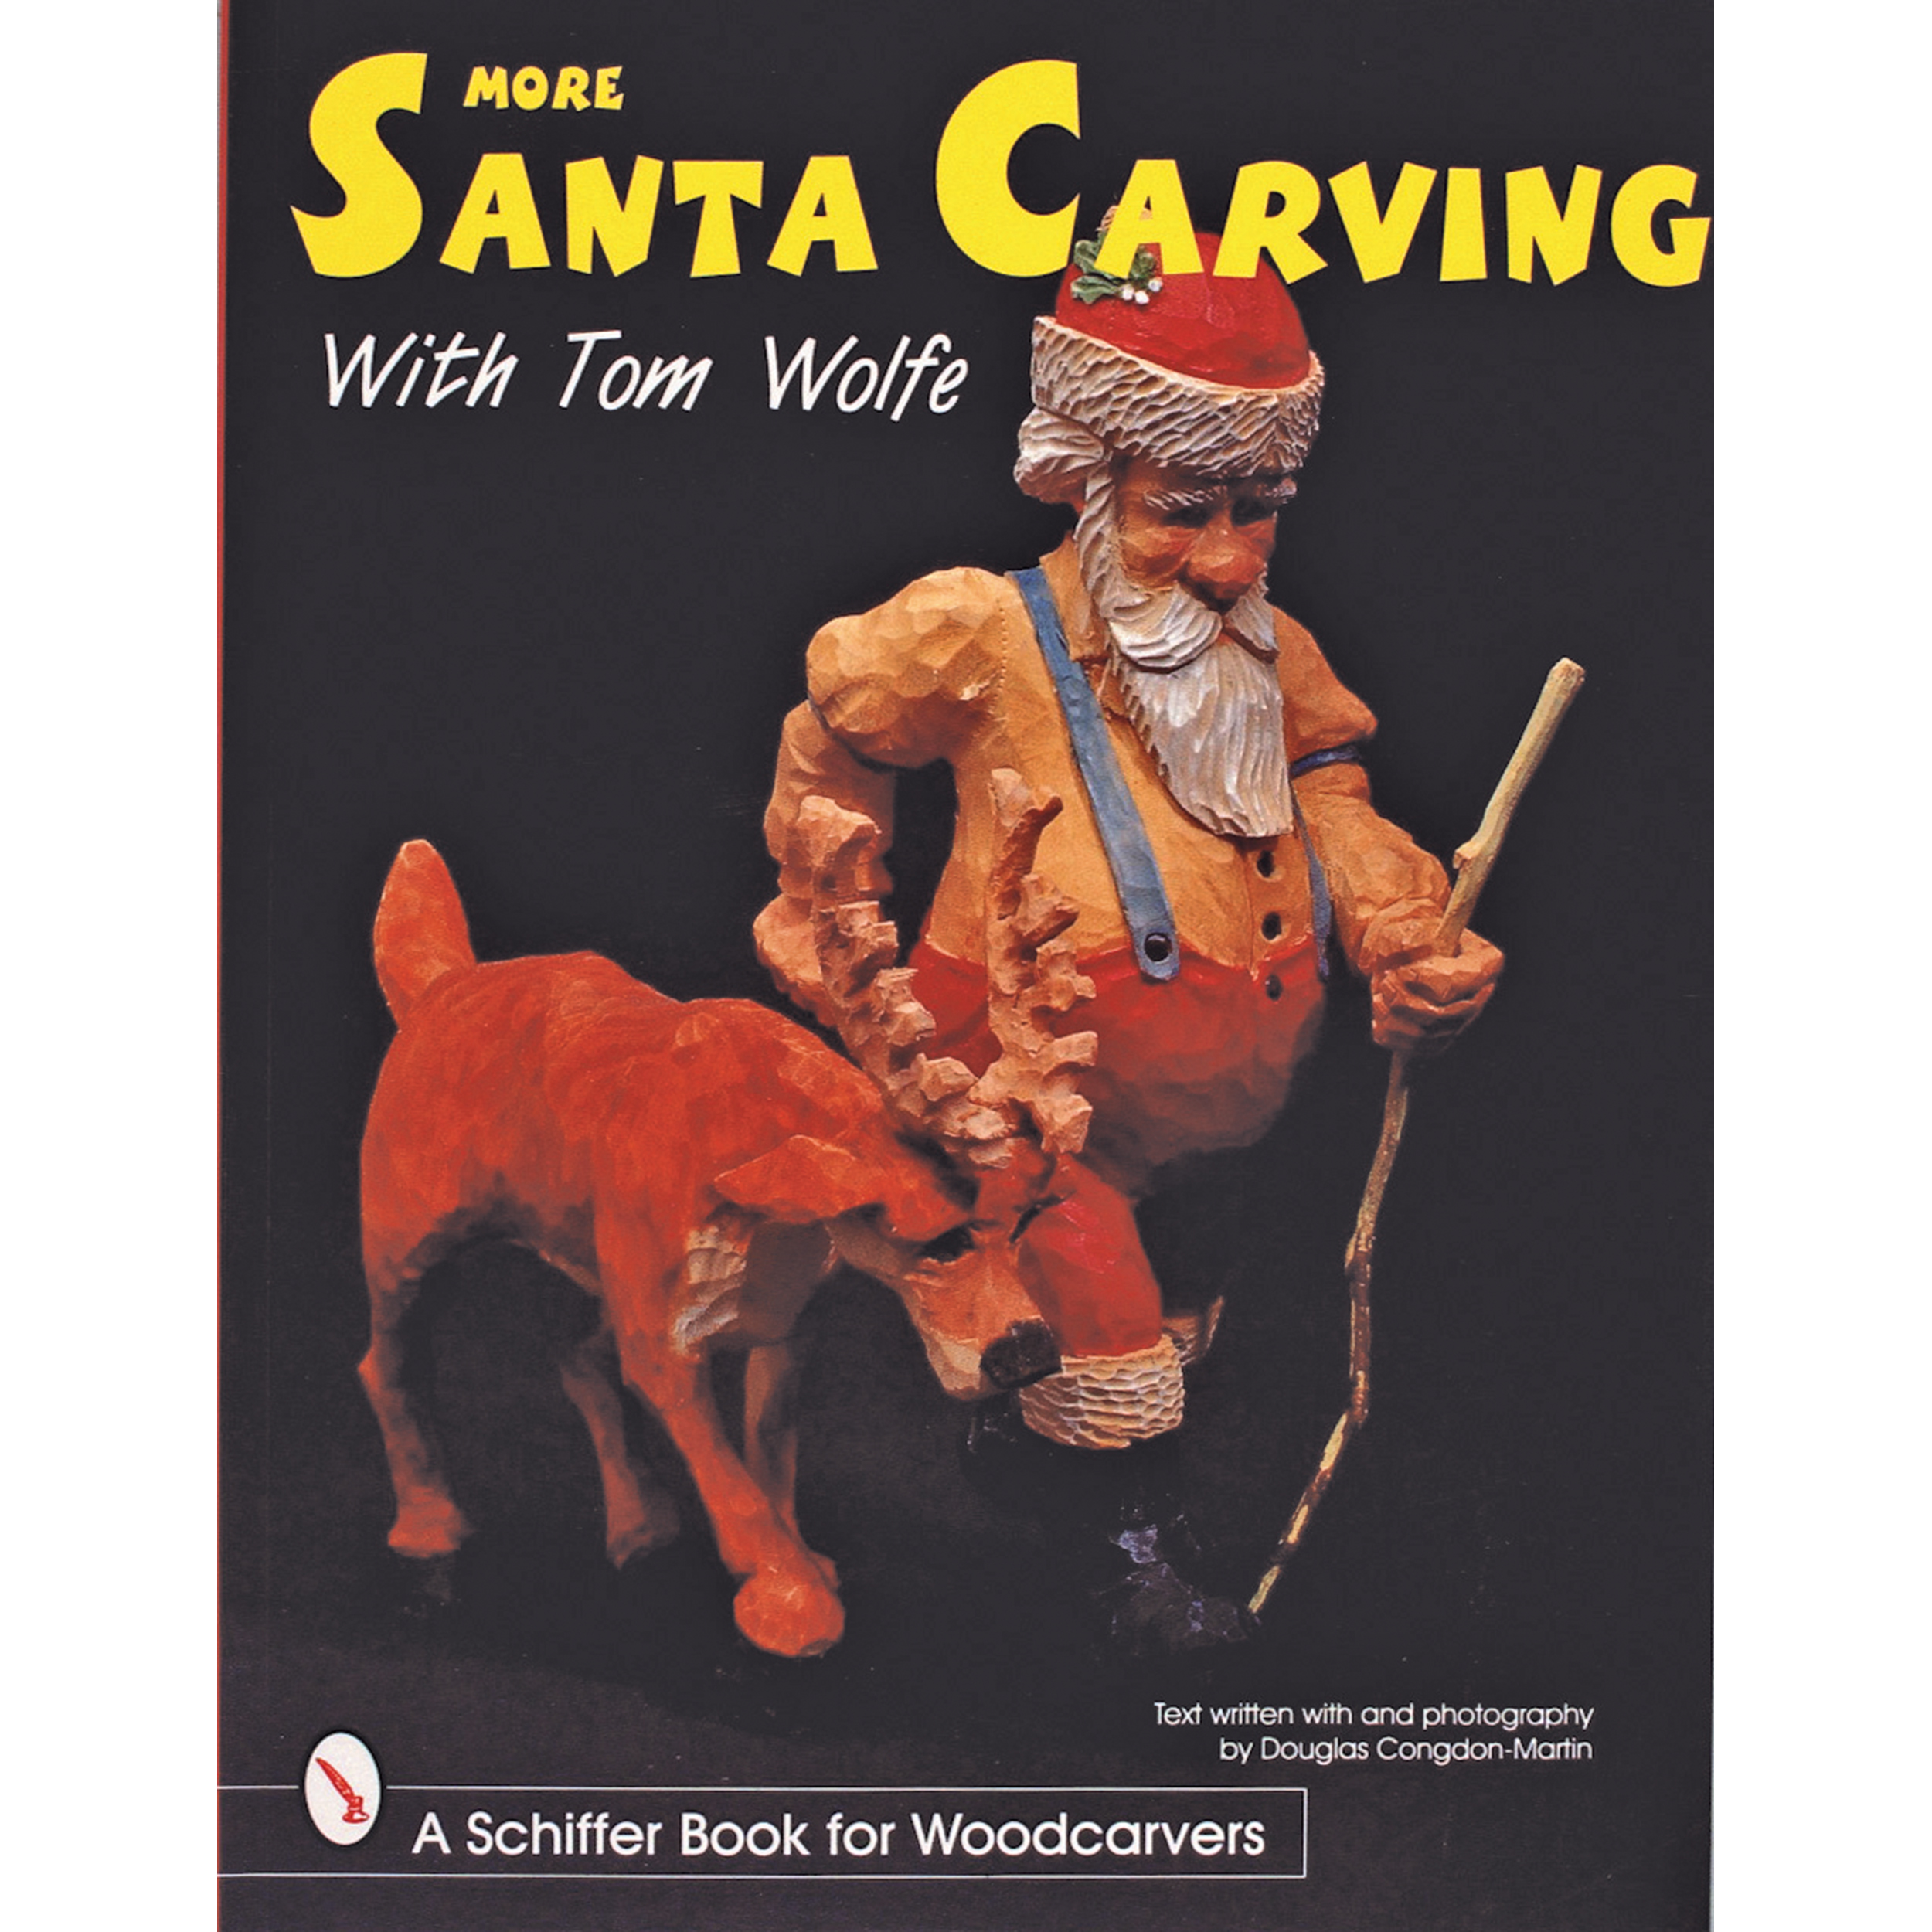 More Santa Carving With Tom Wolfe